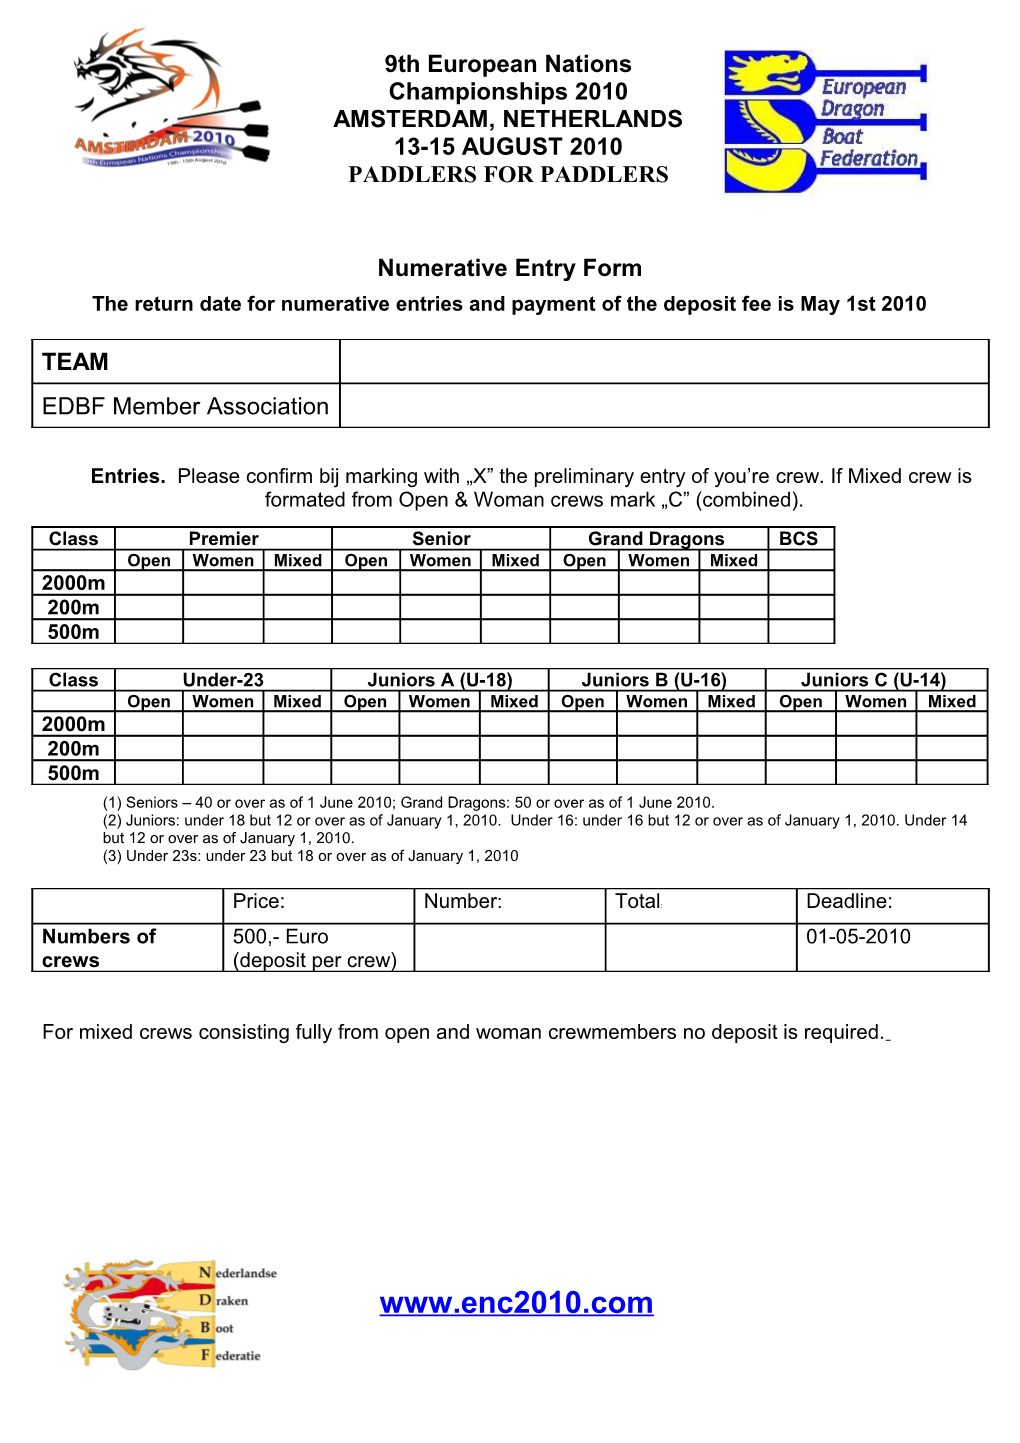 Provisional Entry Form s1